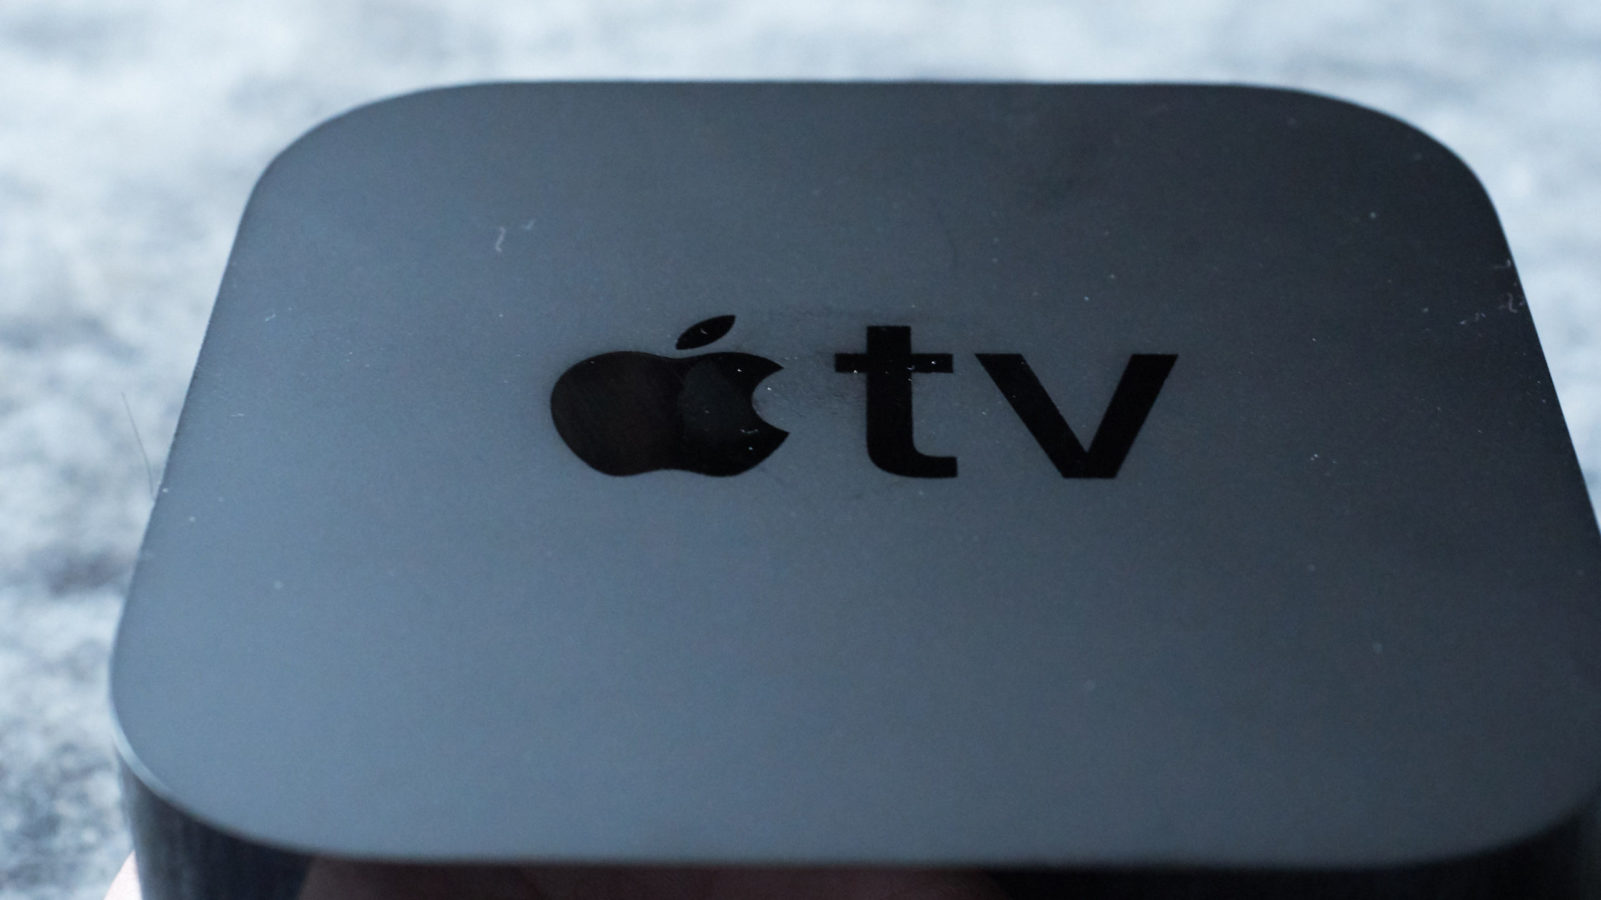 Apple TV. Crédito: Getty Images